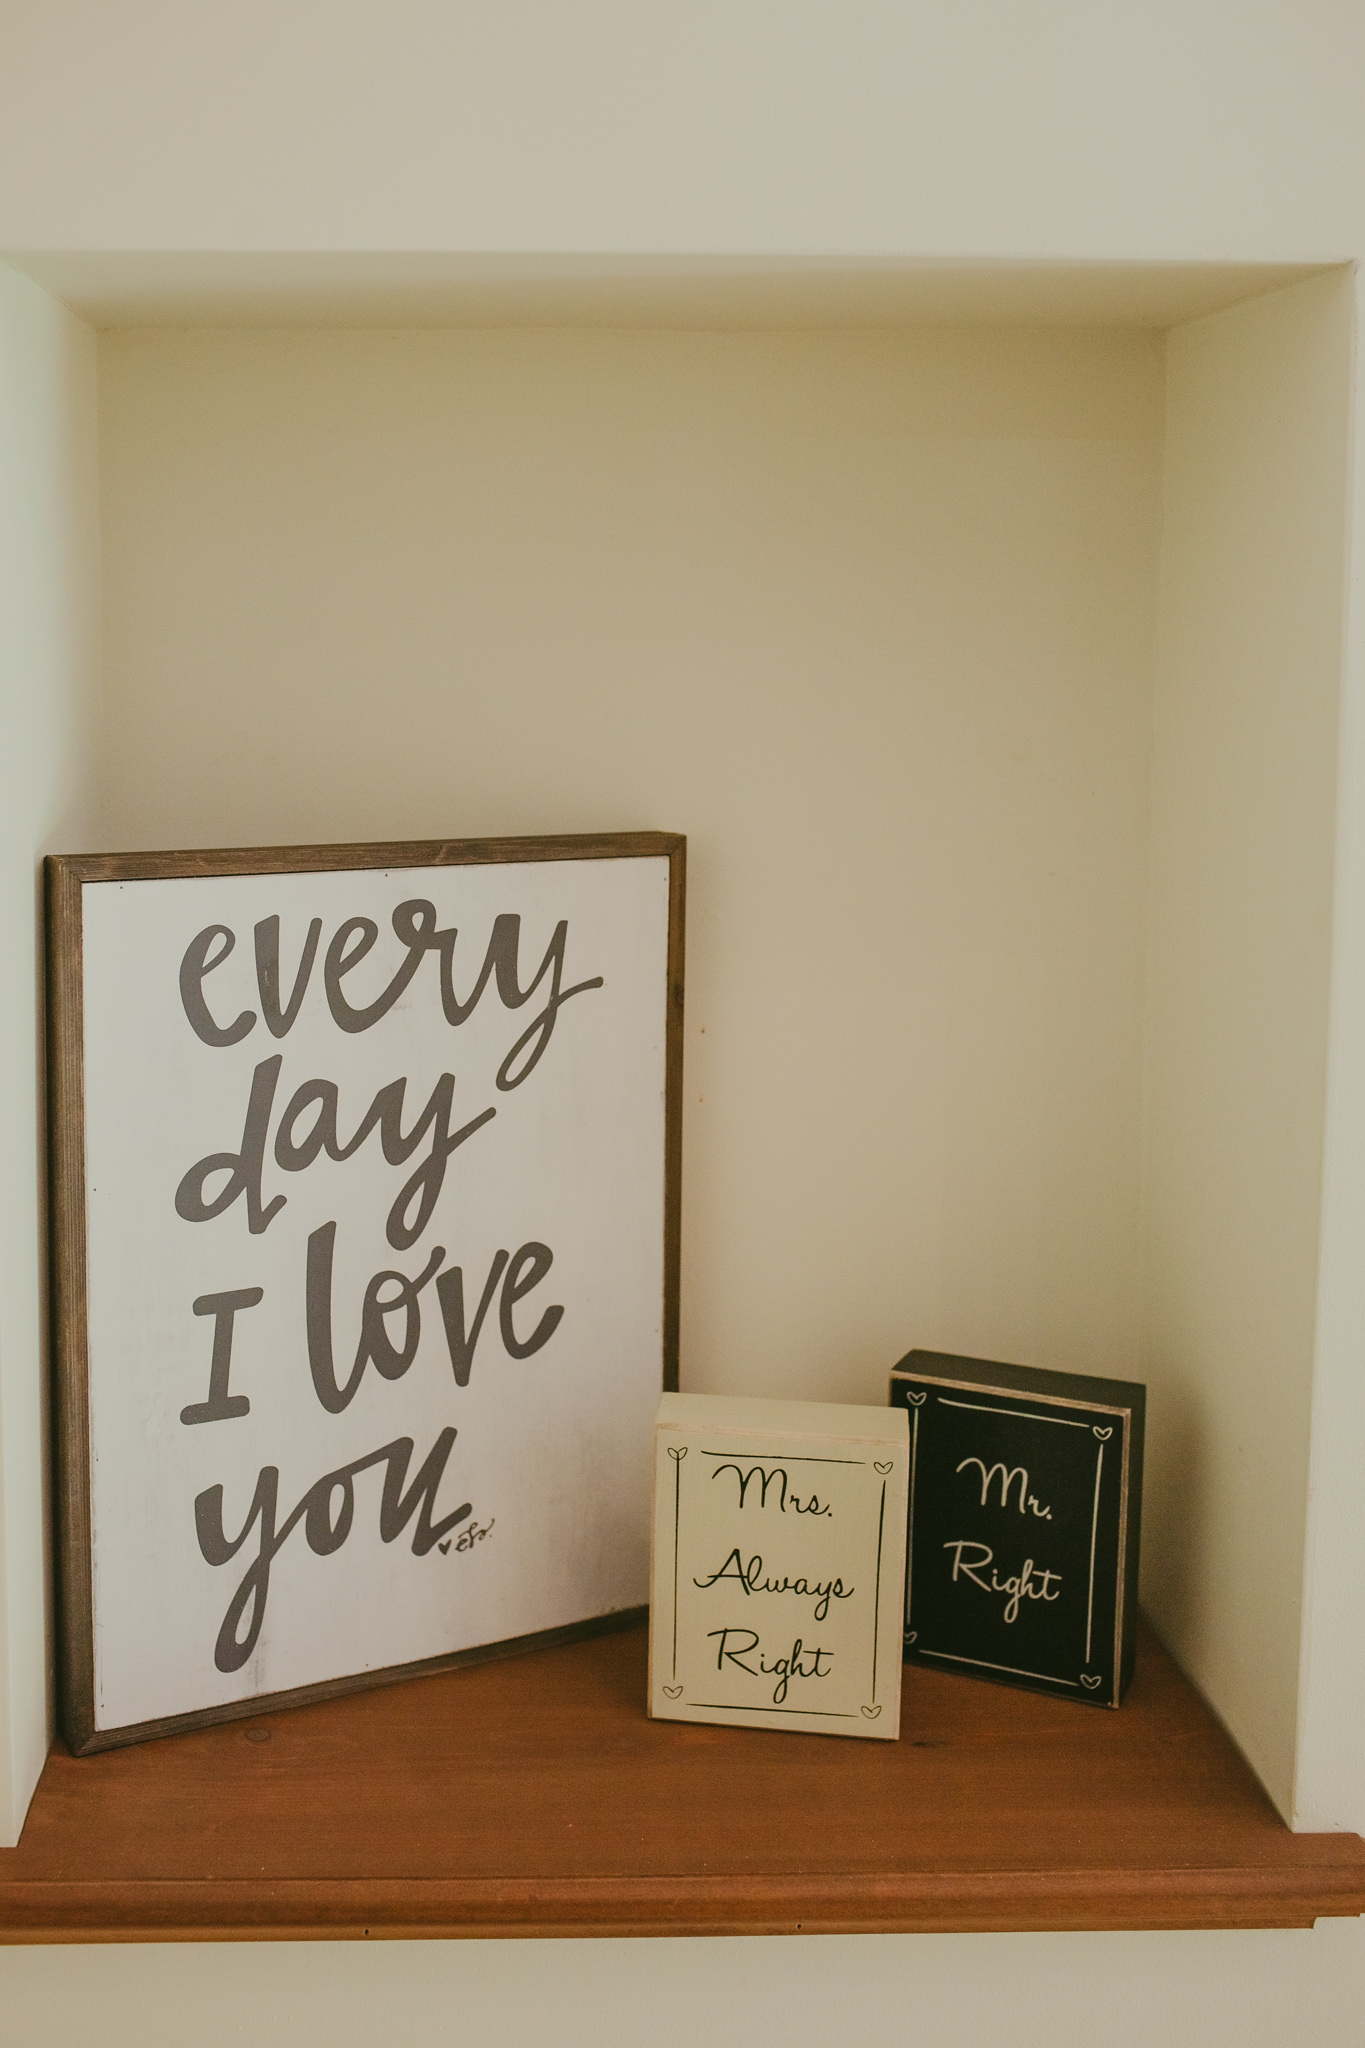 Alexander Homestead has lots of love reminders all over their bridal suite